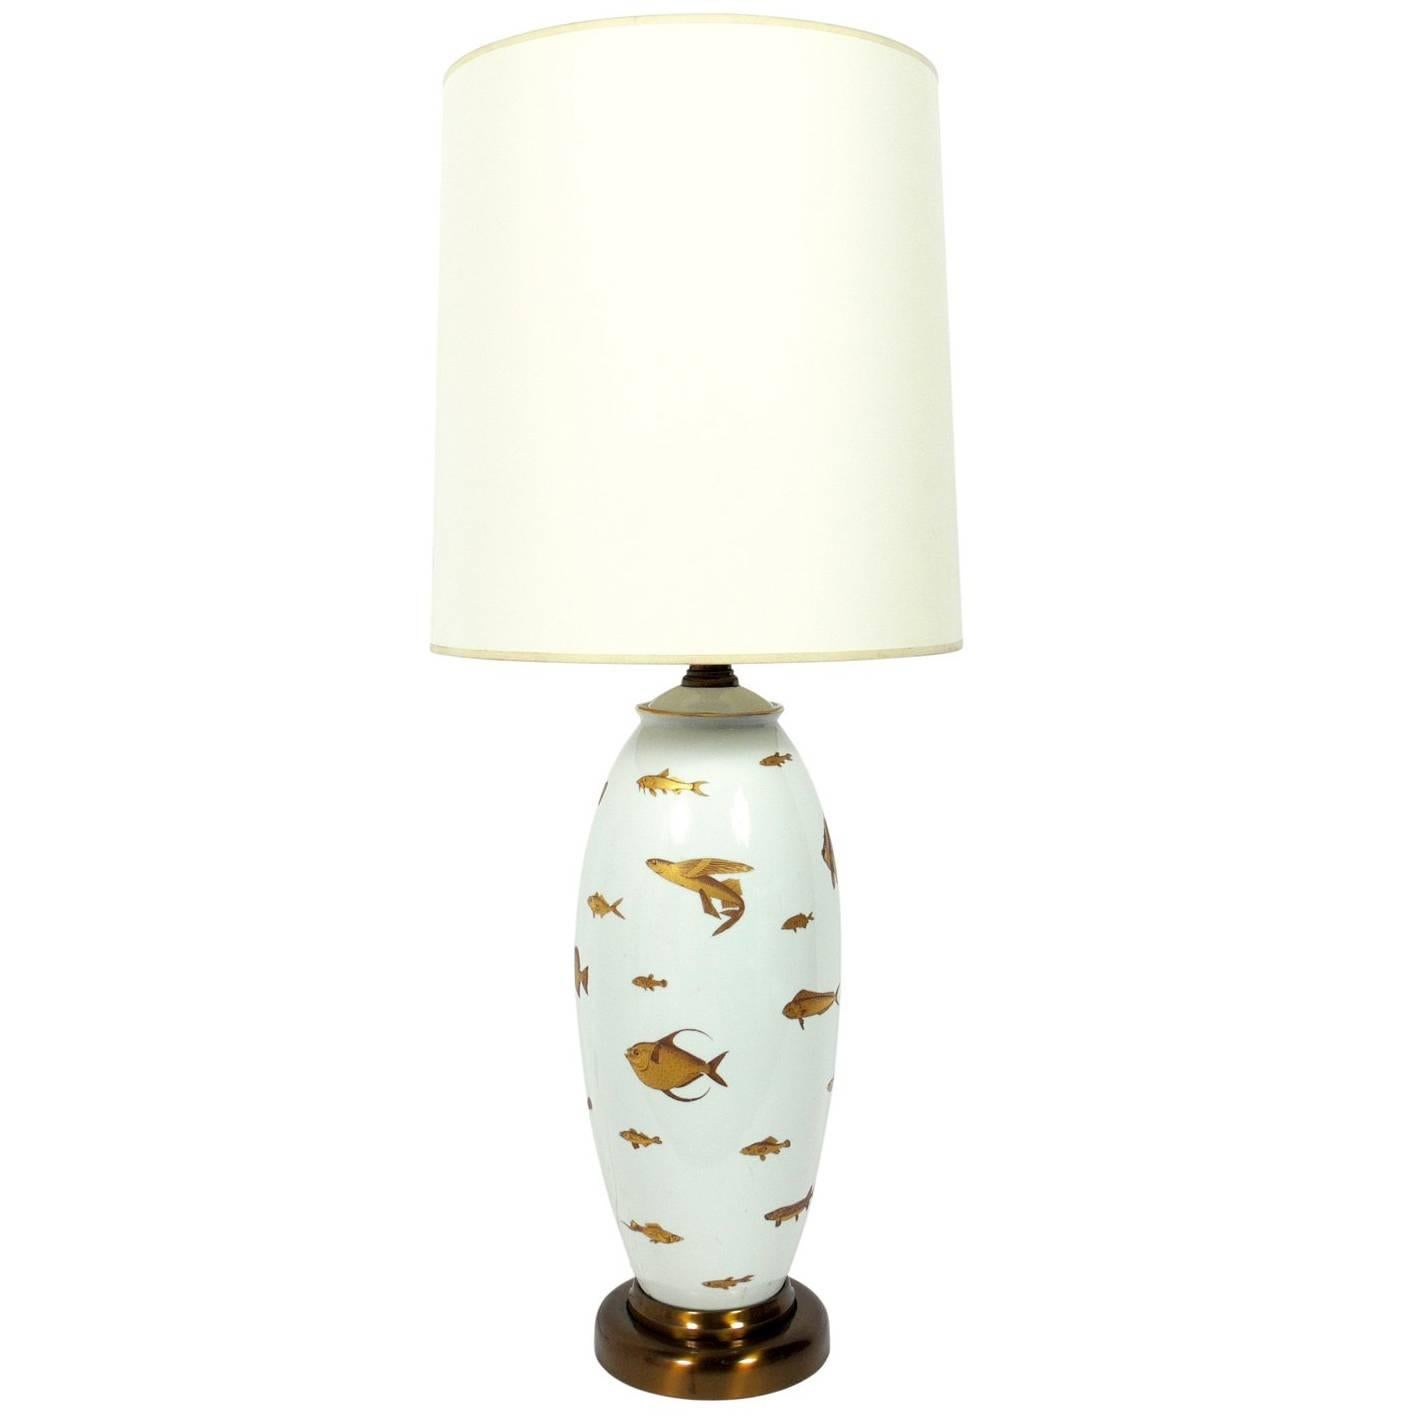 White and Gold Porcelain Fish Lamp